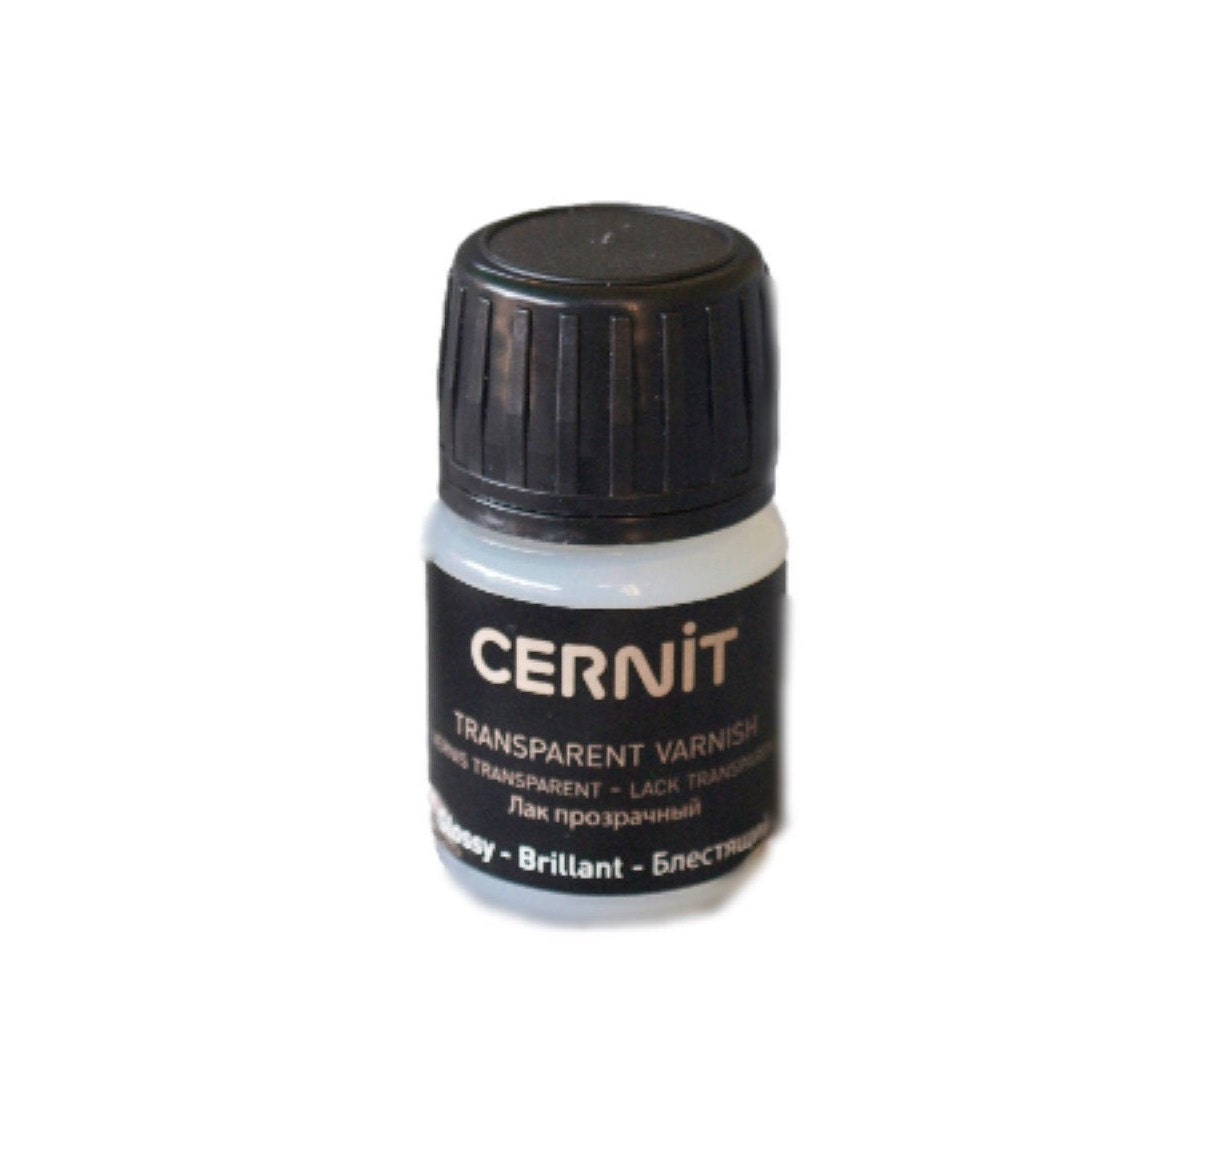 CERNIT Translucent Serie Polymer Clay, Amber, Nr. 721, 56g 2oz,  Oven-hardening Polymer Modeling Clay 